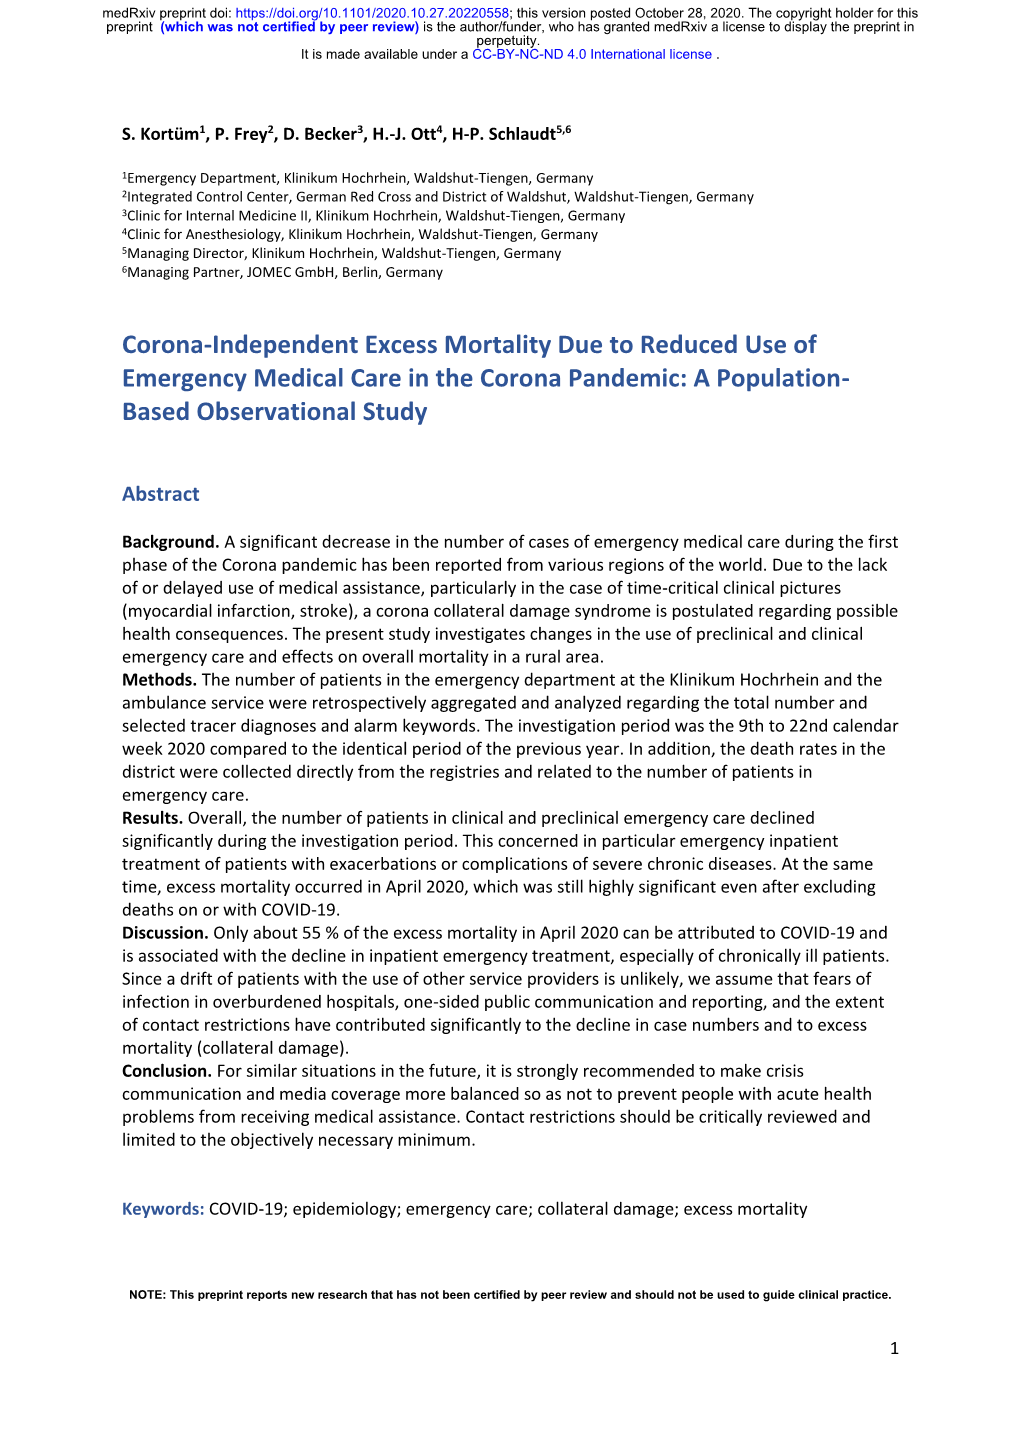 Corona-Independent Excess Mortality Due to Reduced Use of Emergency Medical Care in the Corona Pandemic: a Population- Based Observational Study